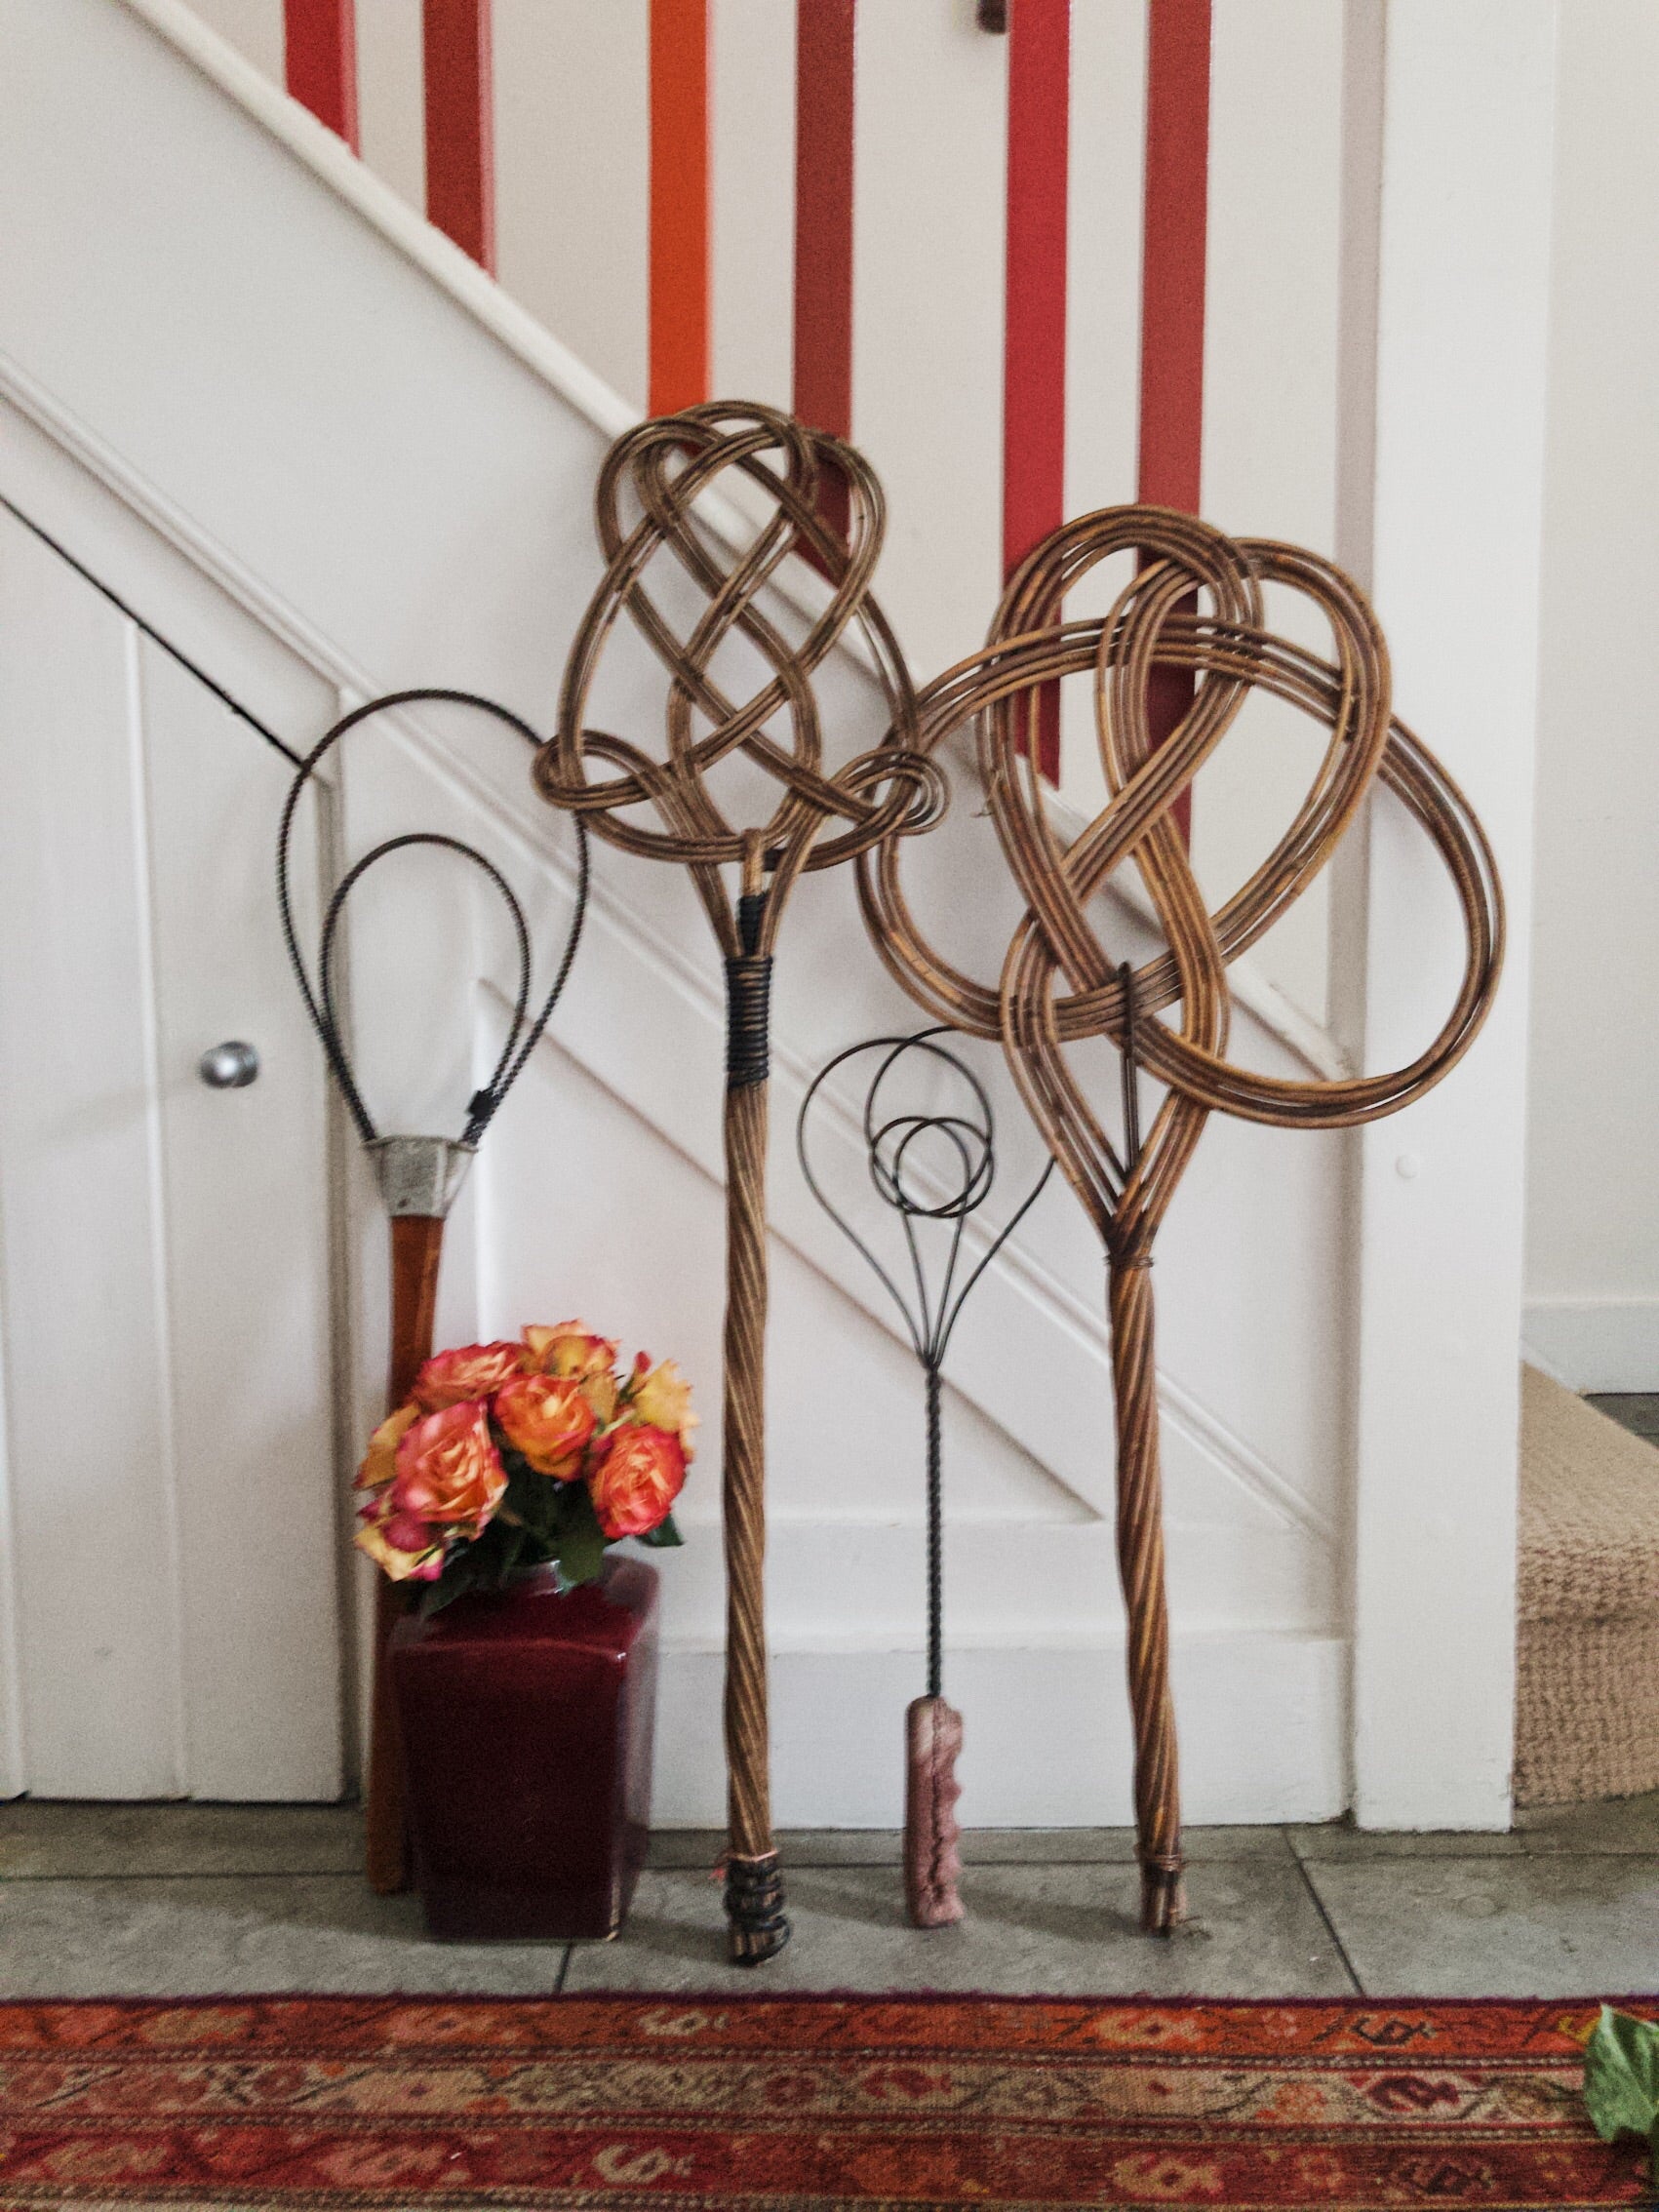 Antique Metal Rug Beater 1 - perfect for a gallery wall.